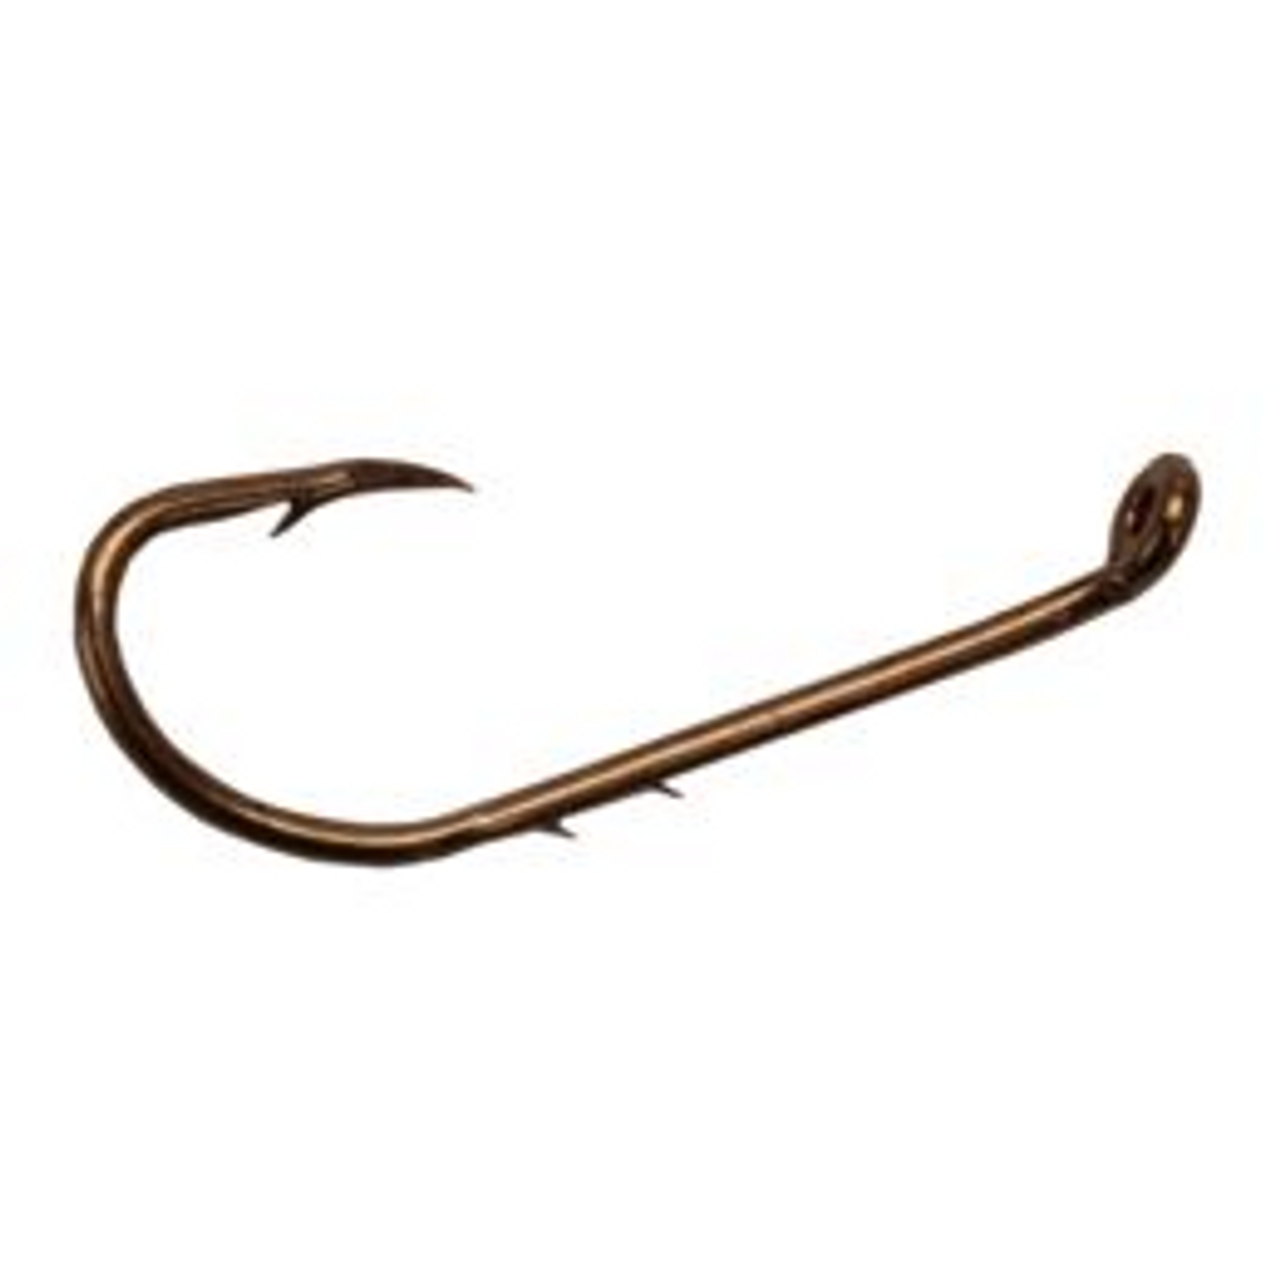  Eagle Claw Lake and Stream Bait Holder Hook (Pack of